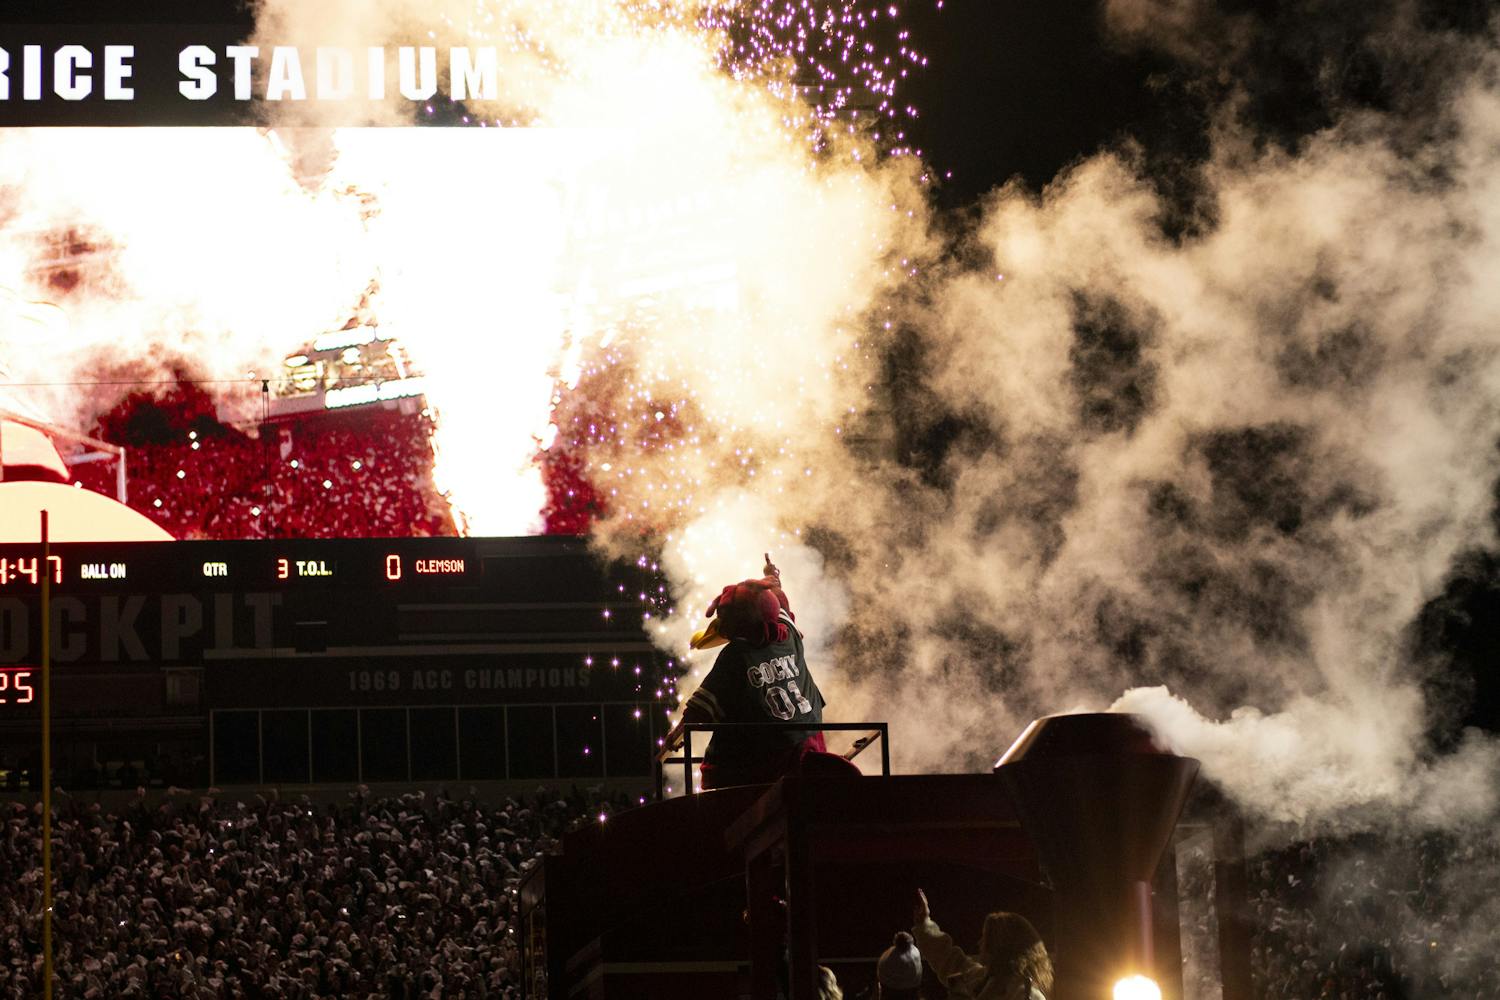 The University of South Carolina’s mascot, Cocky, makes his traditional 2001 Space Odyssey entrance at Williams-Brice Stadium on Nov. 25, 2023. The mascot updated his entrance in 2023 by emerging from a "Cockaboose" train.